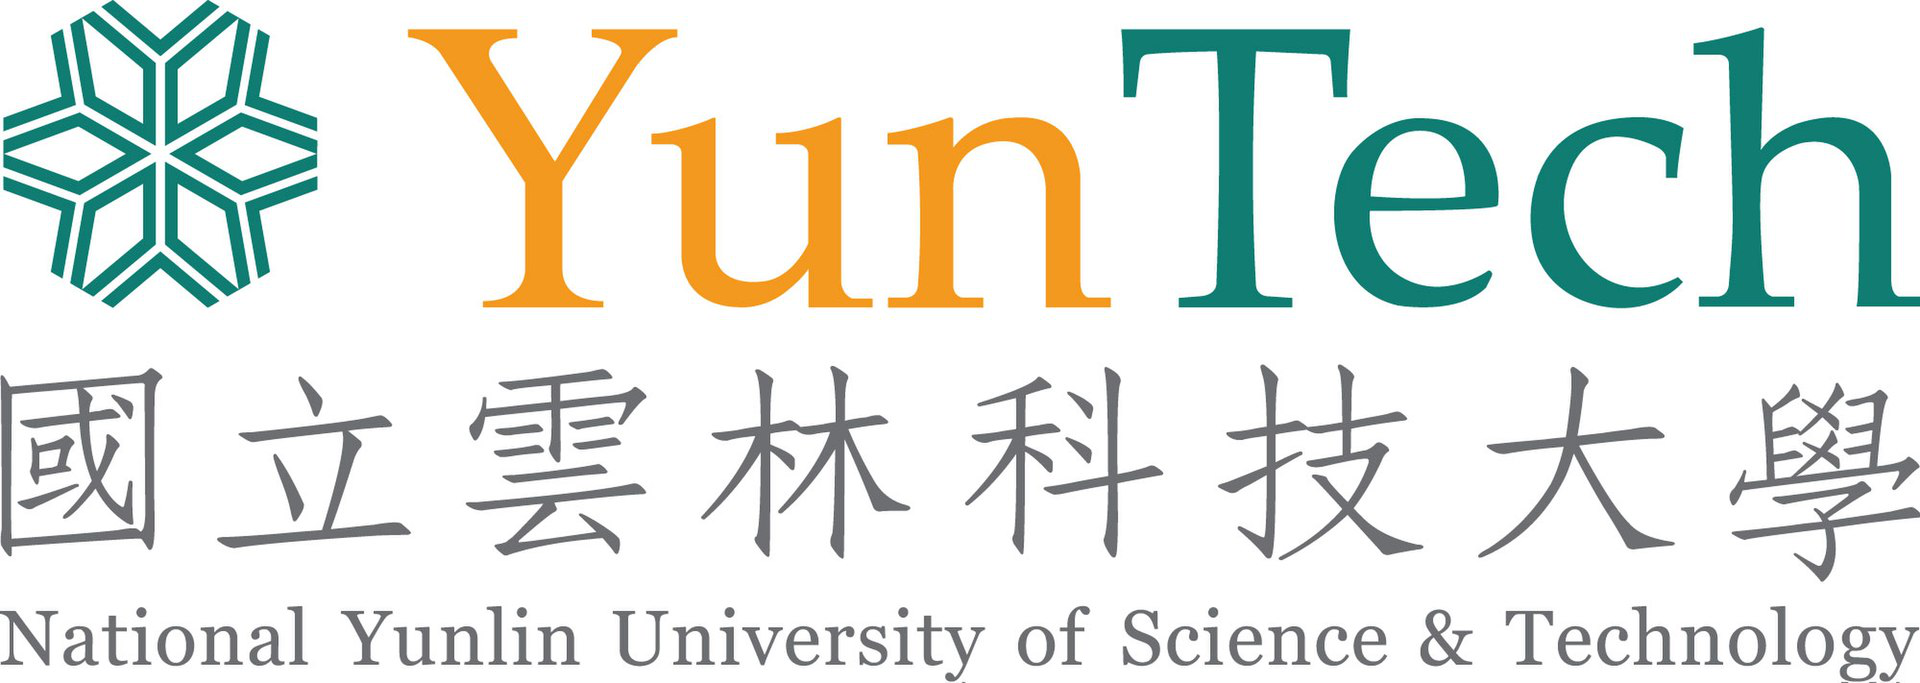 National Yunlin University of Science and Technology